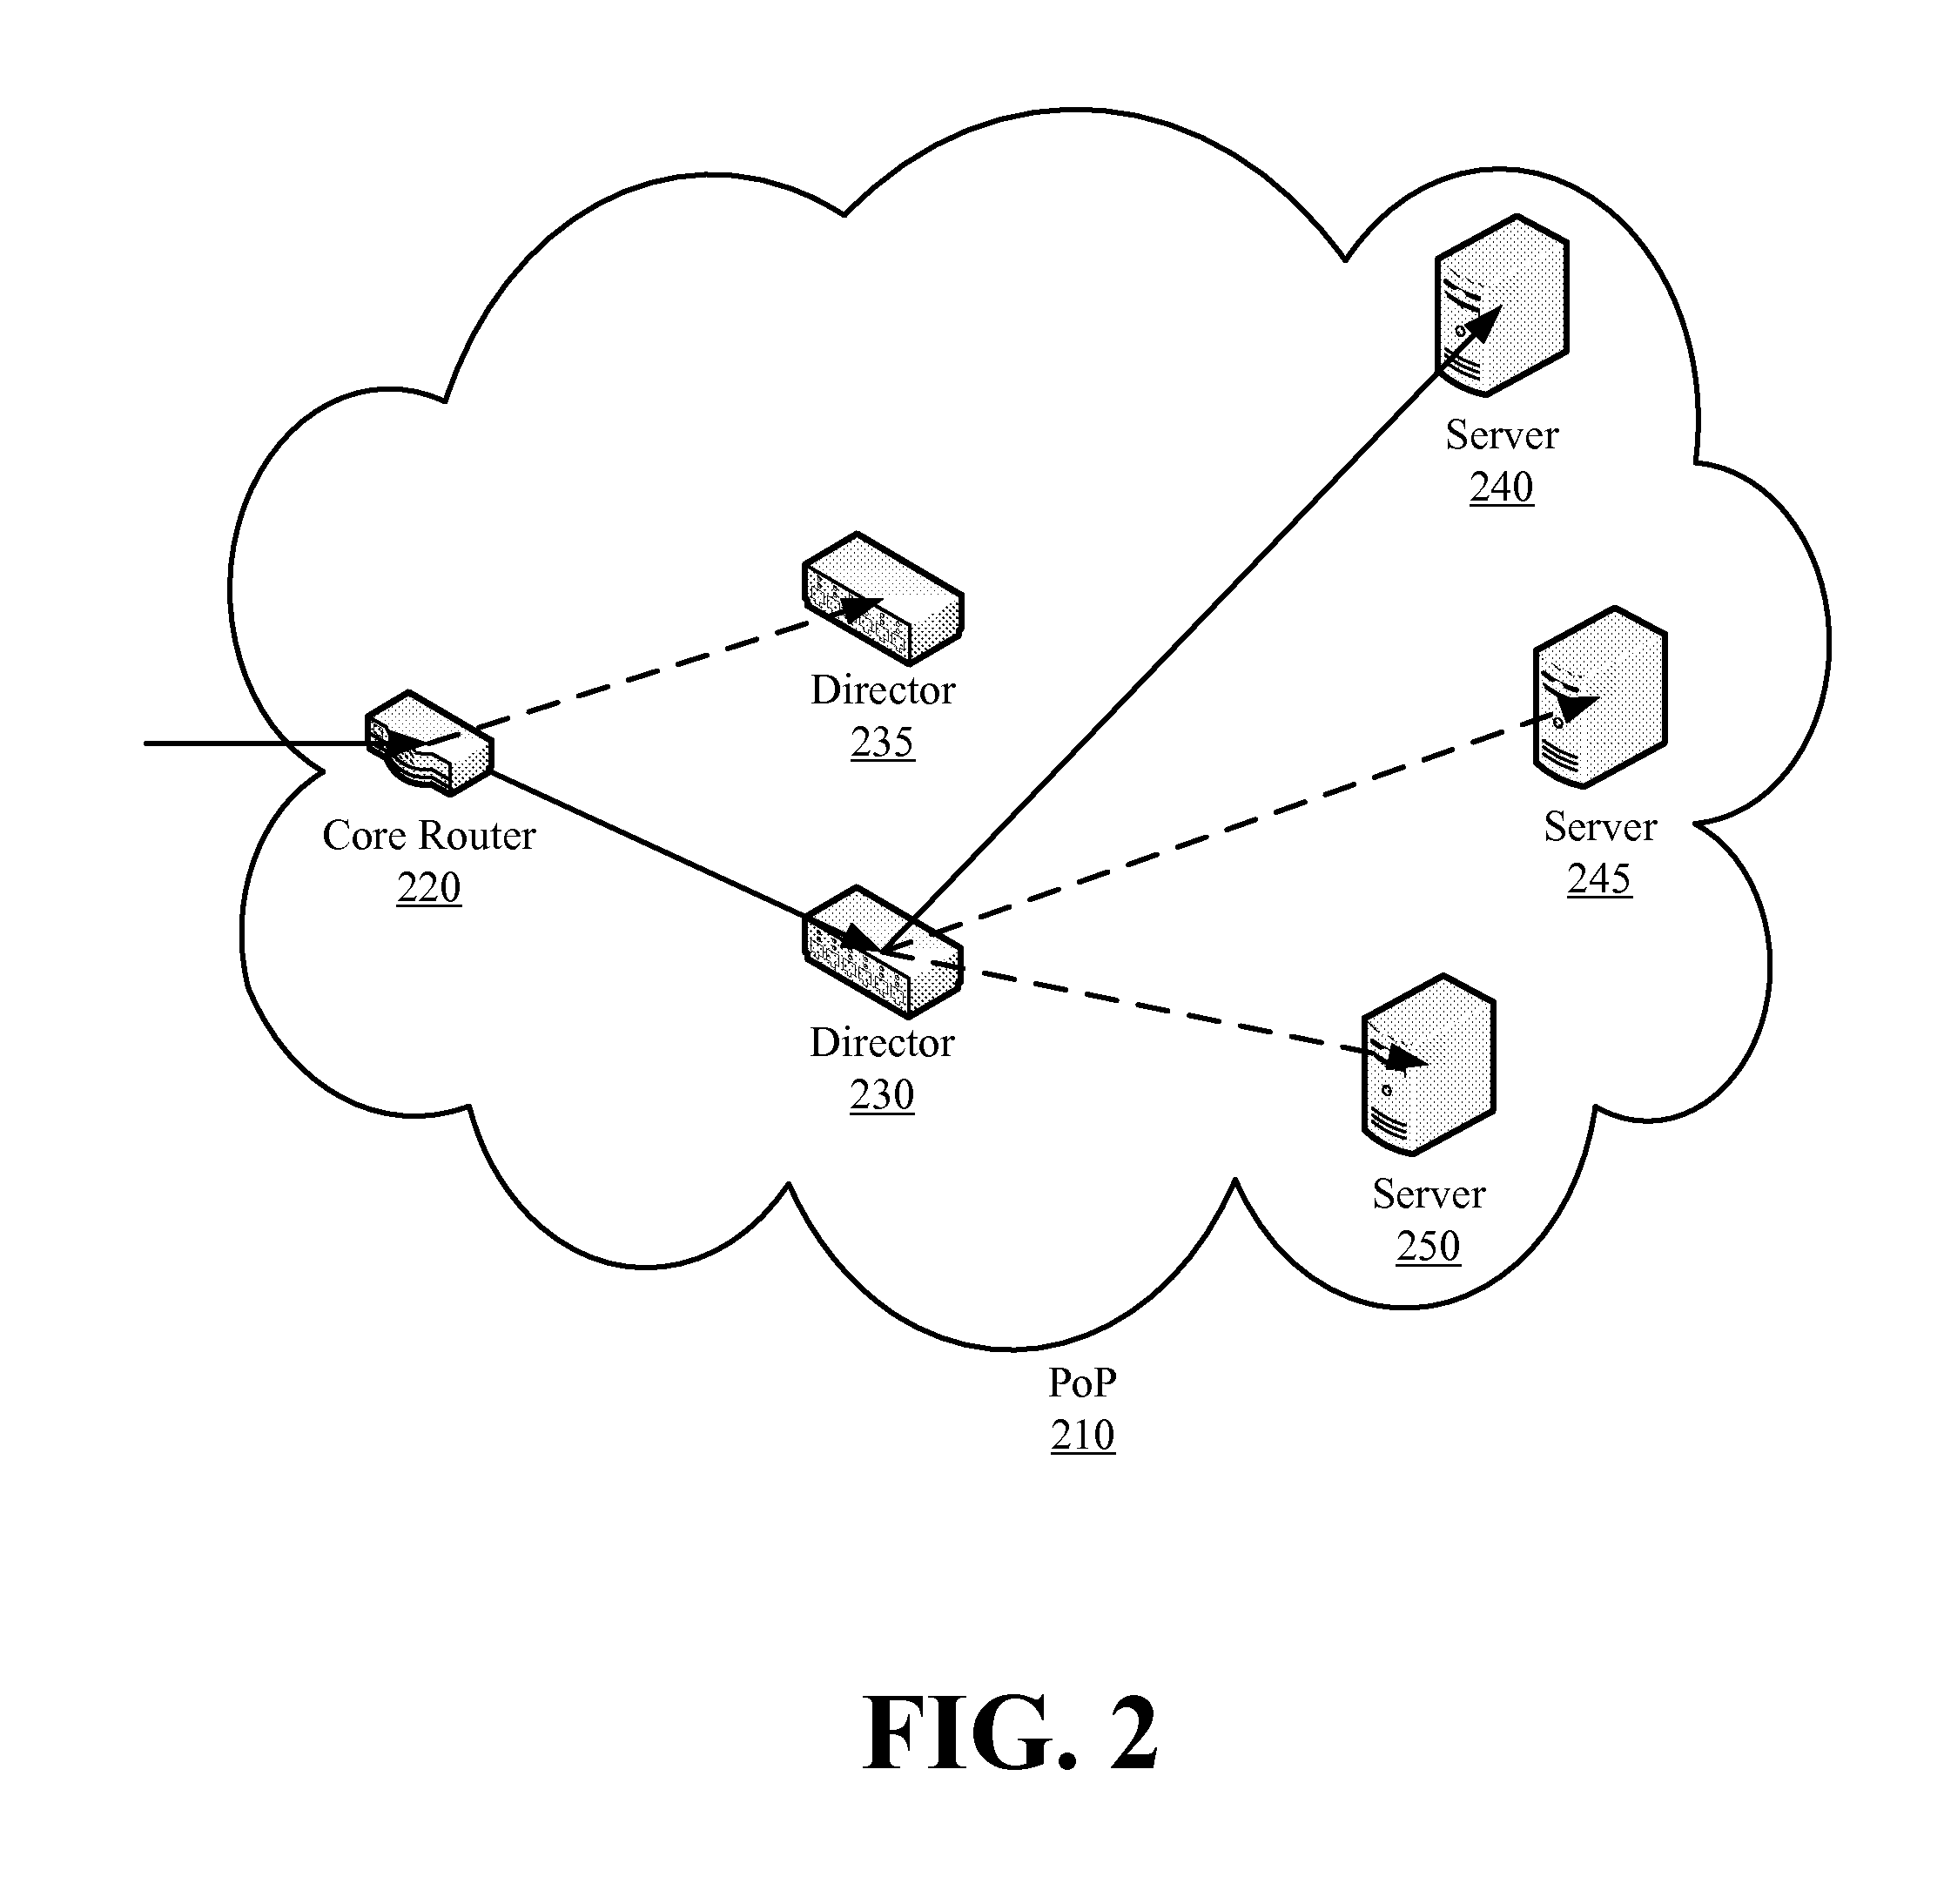 Control message routing within anycast reliant platforms